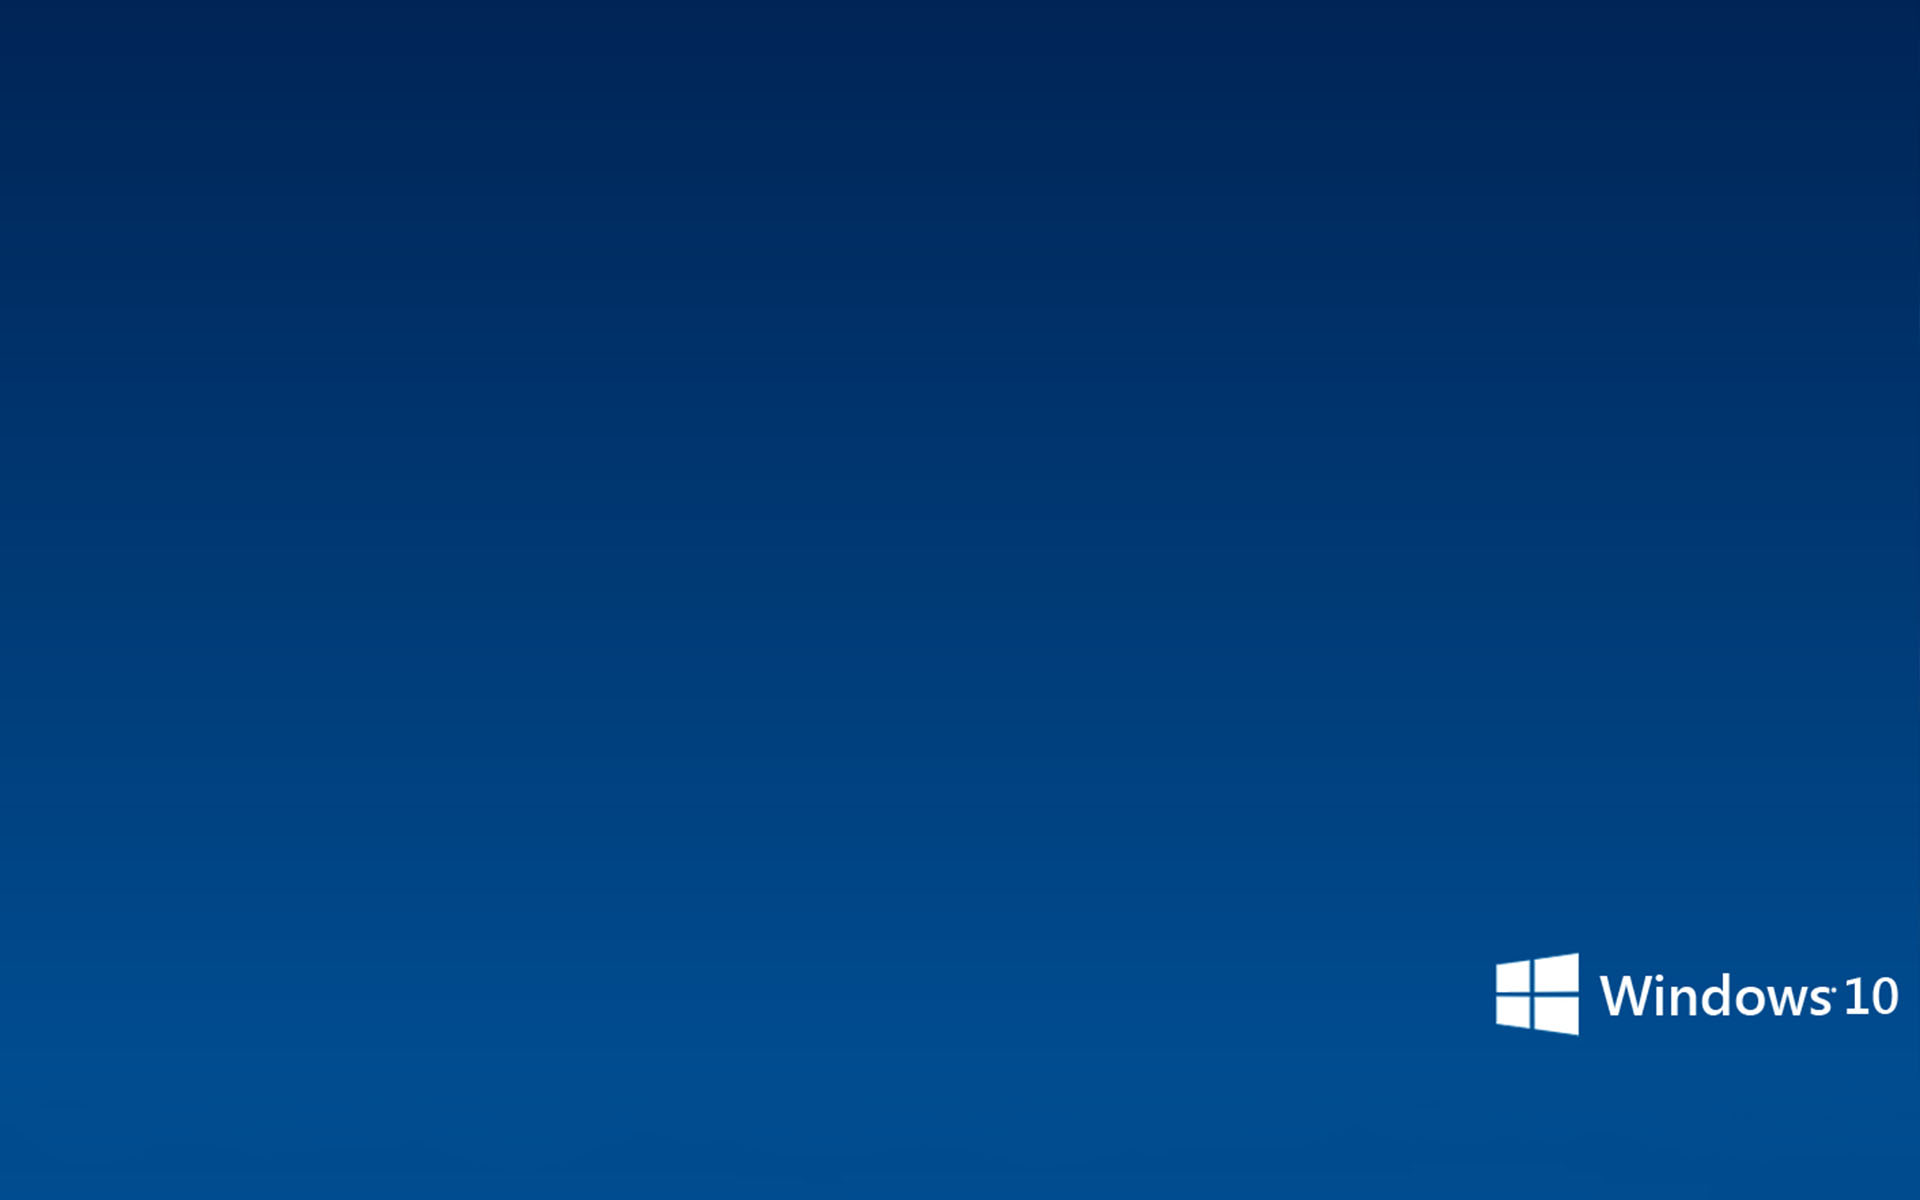 Free Download Simple Microsoft Windows 10 Wallpaper Wallpapers 19x10 For Your Desktop Mobile Tablet Explore 46 Ms 10 Wallpaper Microsoft Wallpaper For Windows 10 Win 10 Hd Wallpaper Wallpaper Studio 10